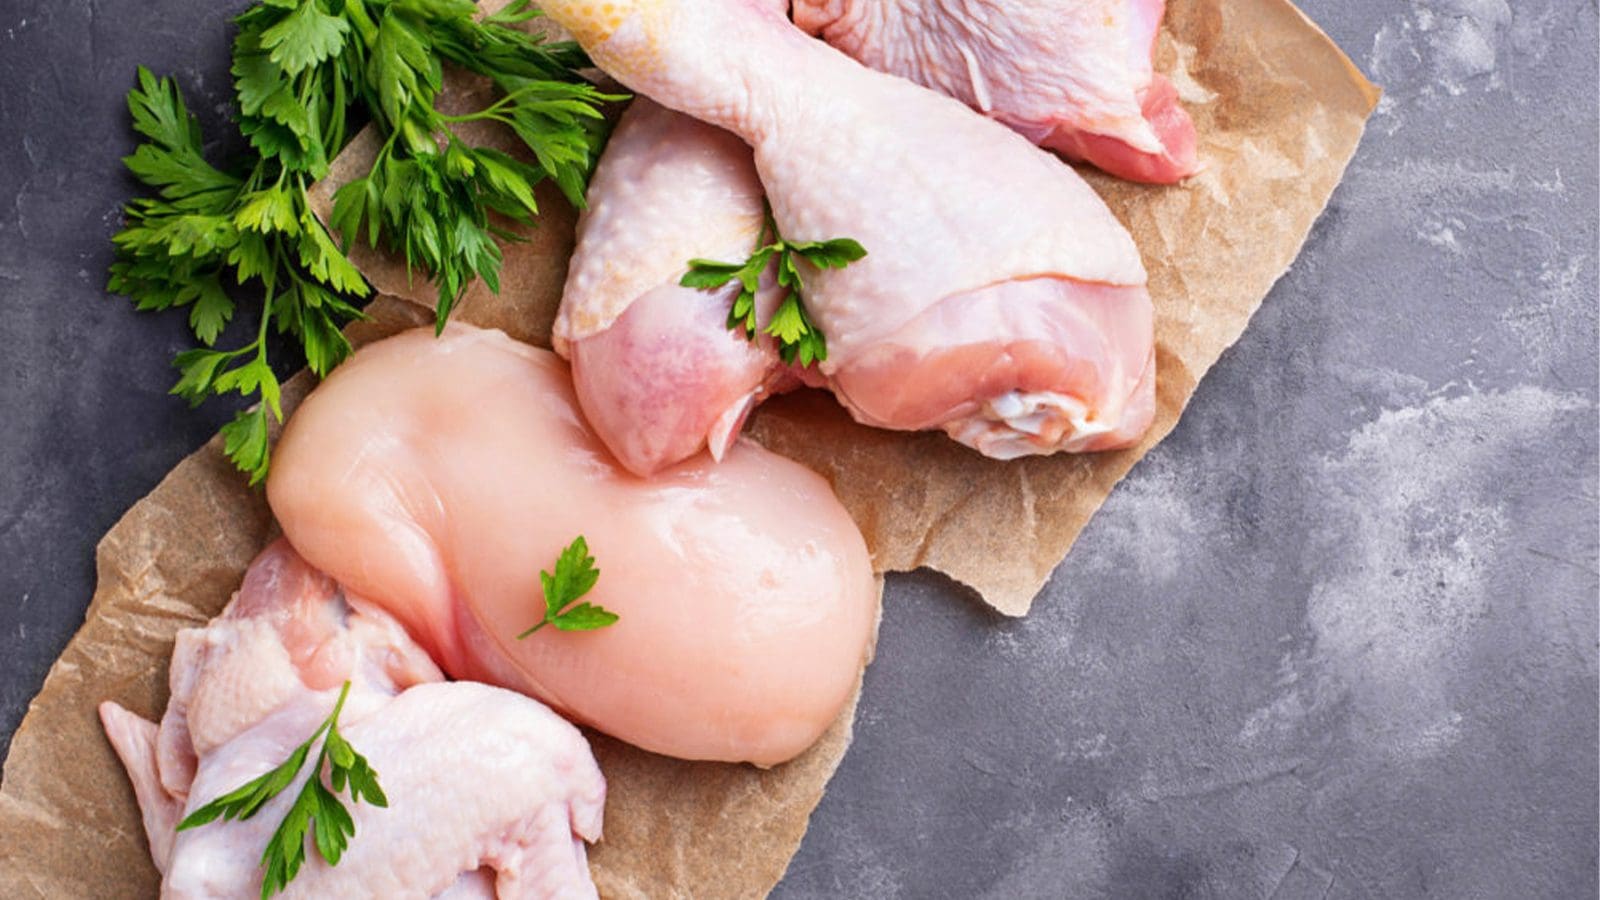 Sensor-based system aims to tackle Salmonella across poultry supply chain